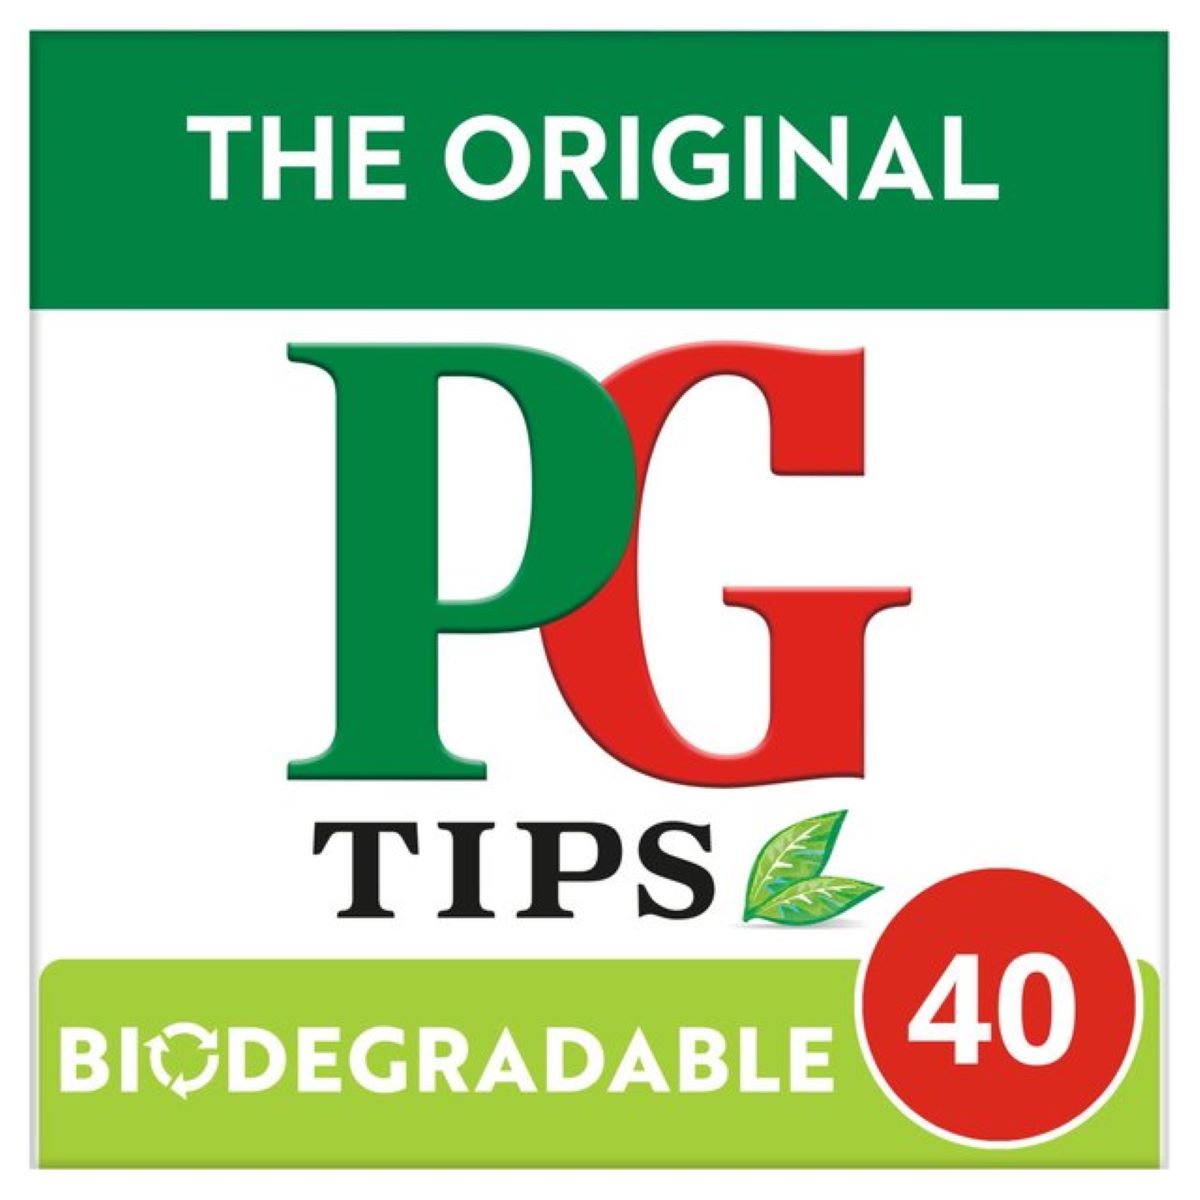 PG Tips Pyramid Biodegradable Teabags 40 per pack 116g